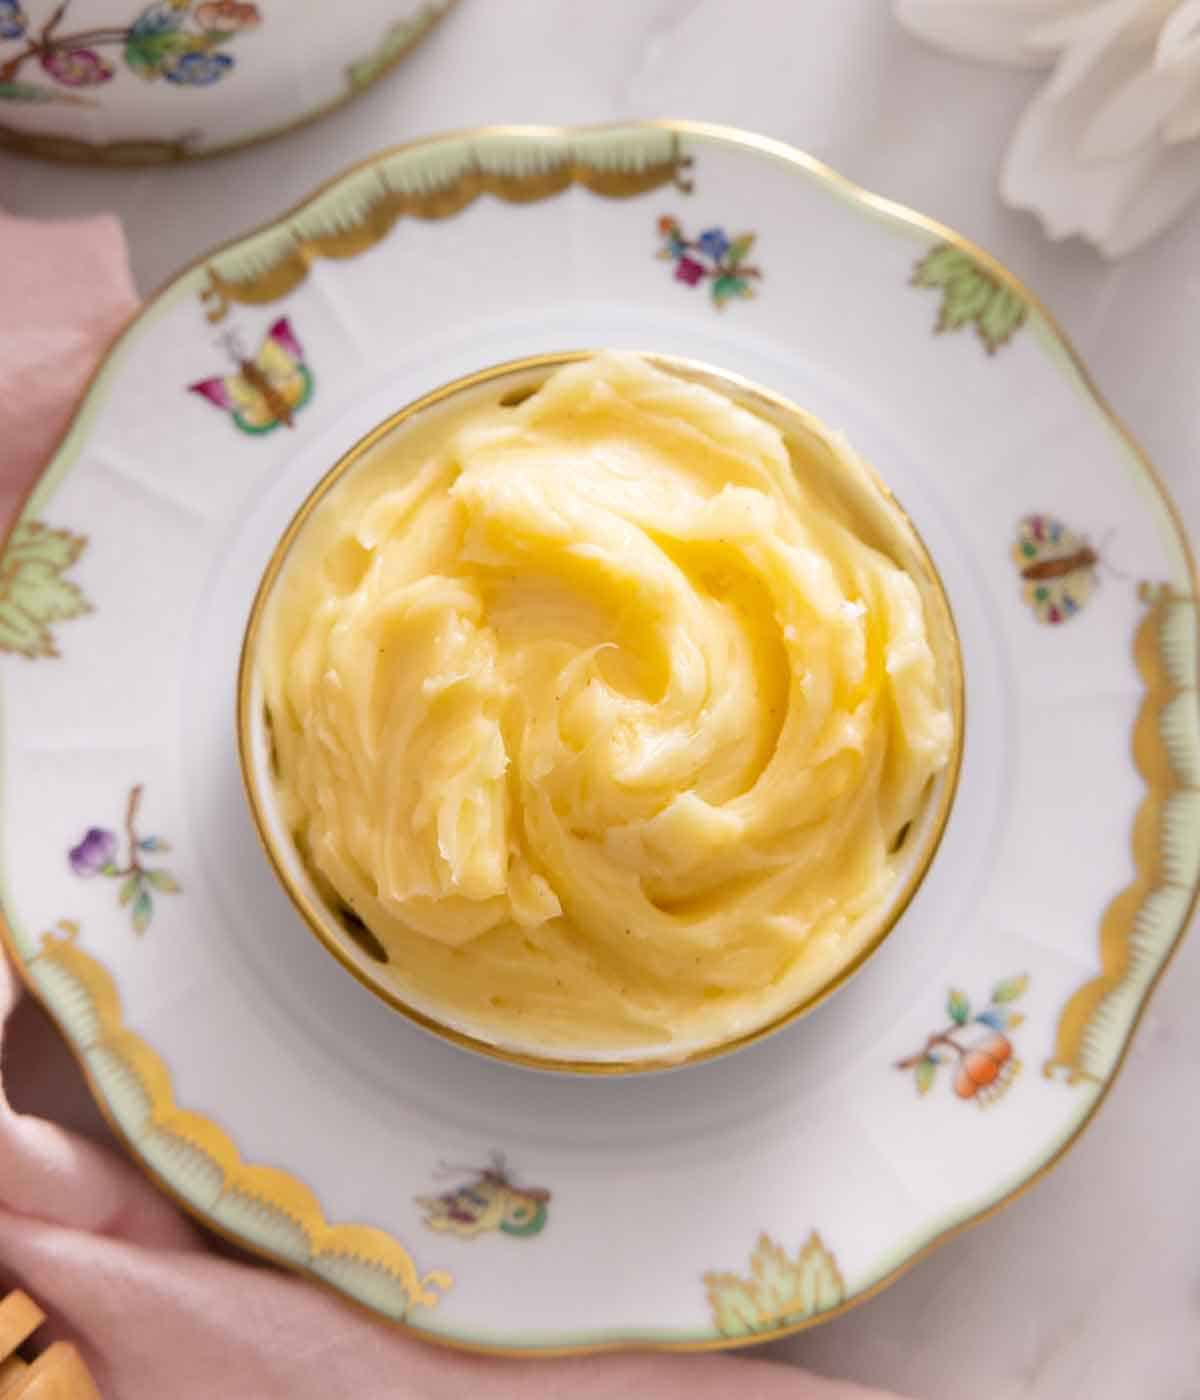 Overhead view of a bowl of honey butter on a plate.